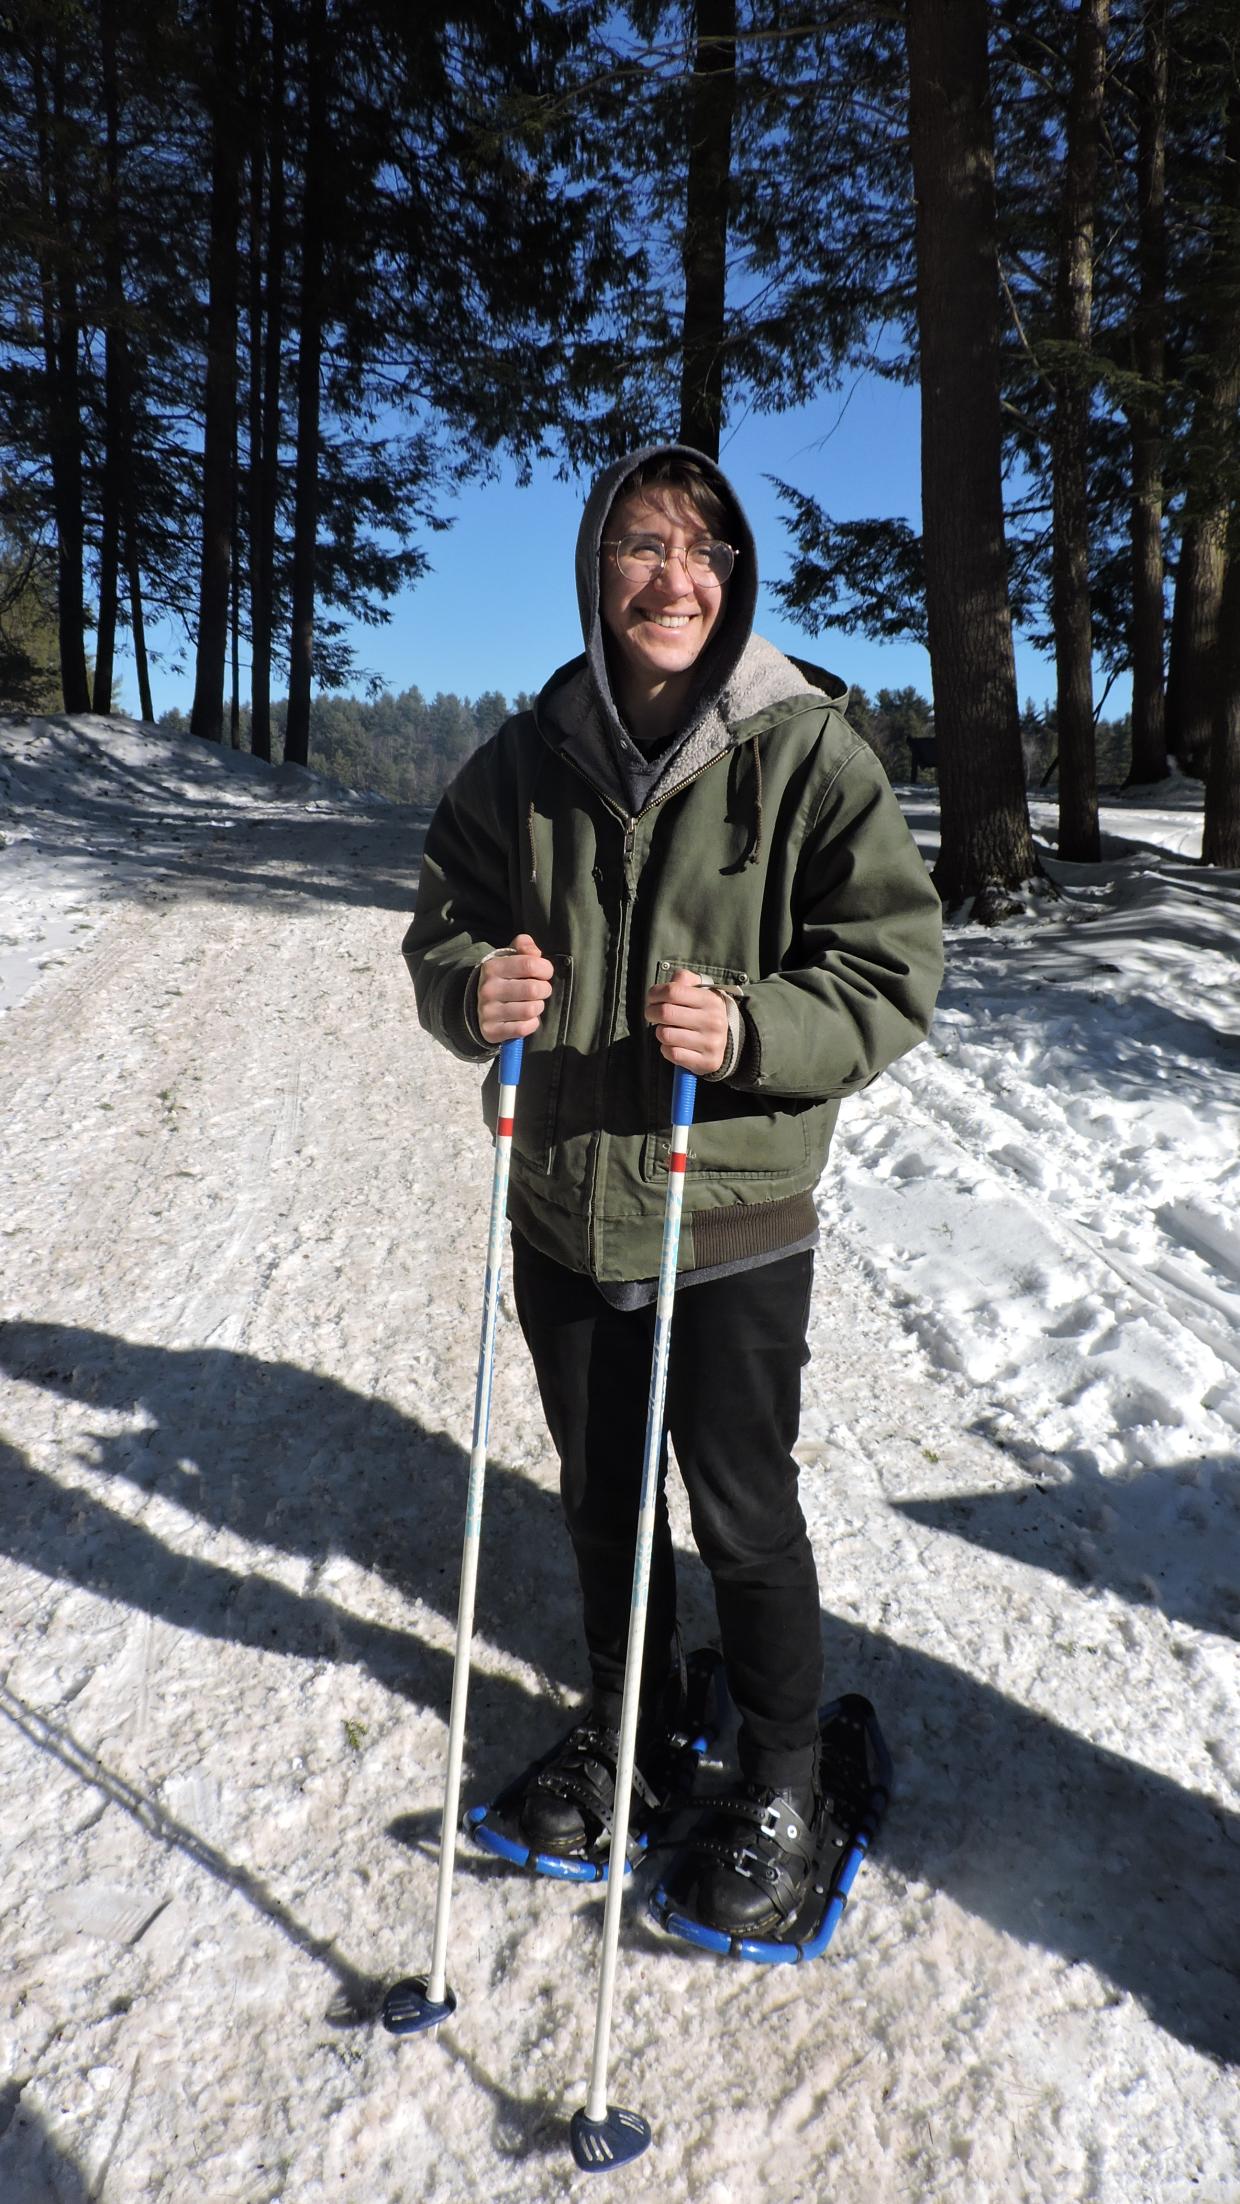 A person wearing snowshoes and holding ski poles on a plowed, snowy, wide, path in the woods.